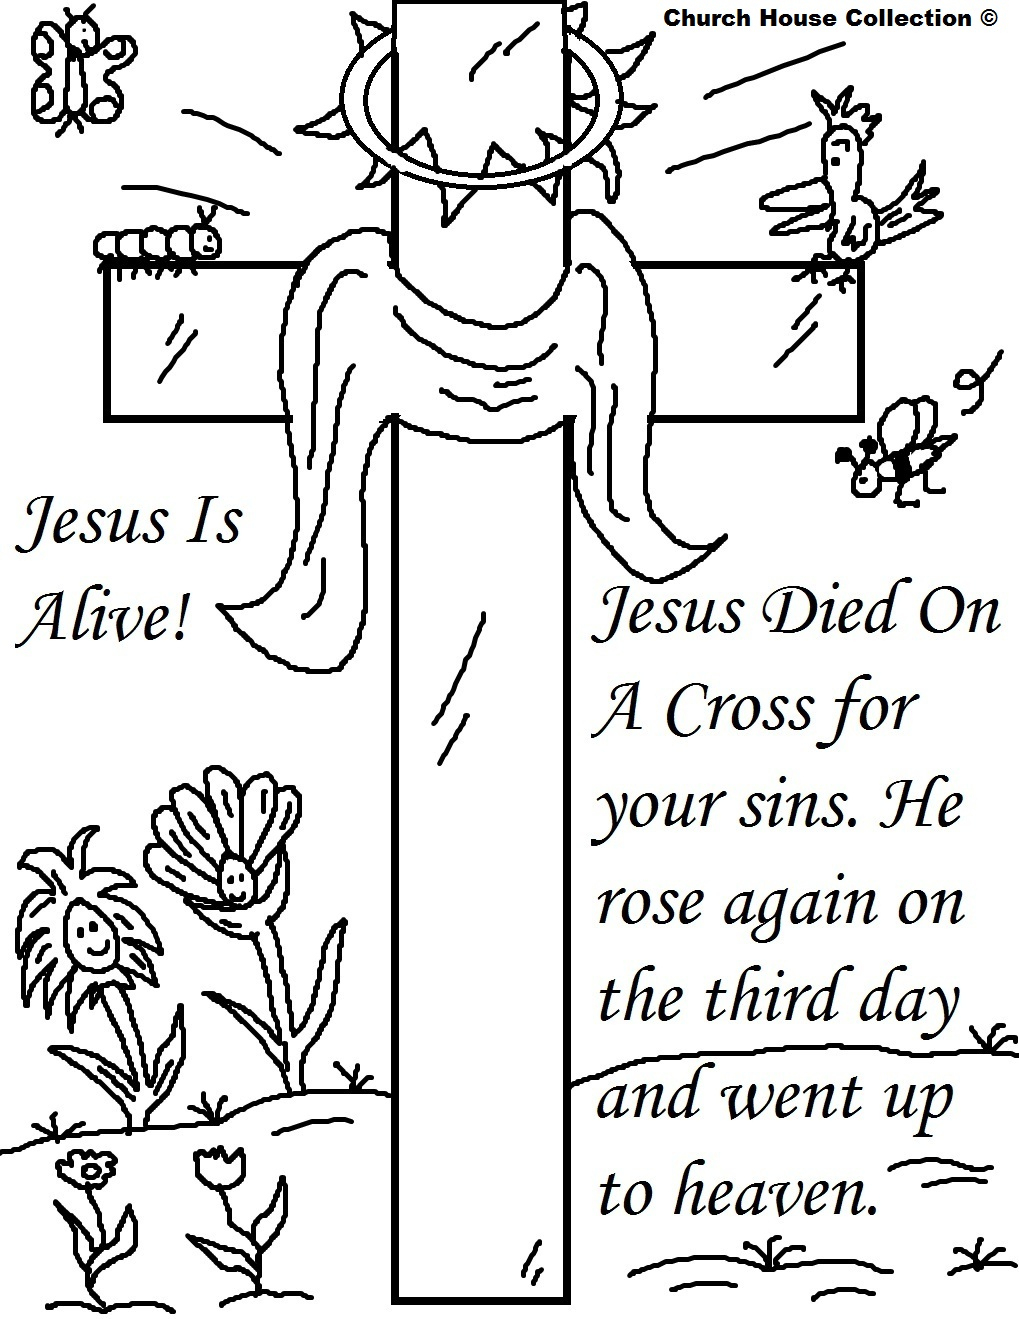 25 Religious Easter Coloring Pages | Free Easter Activity Printables - Coloring Pages Free Printable Easter